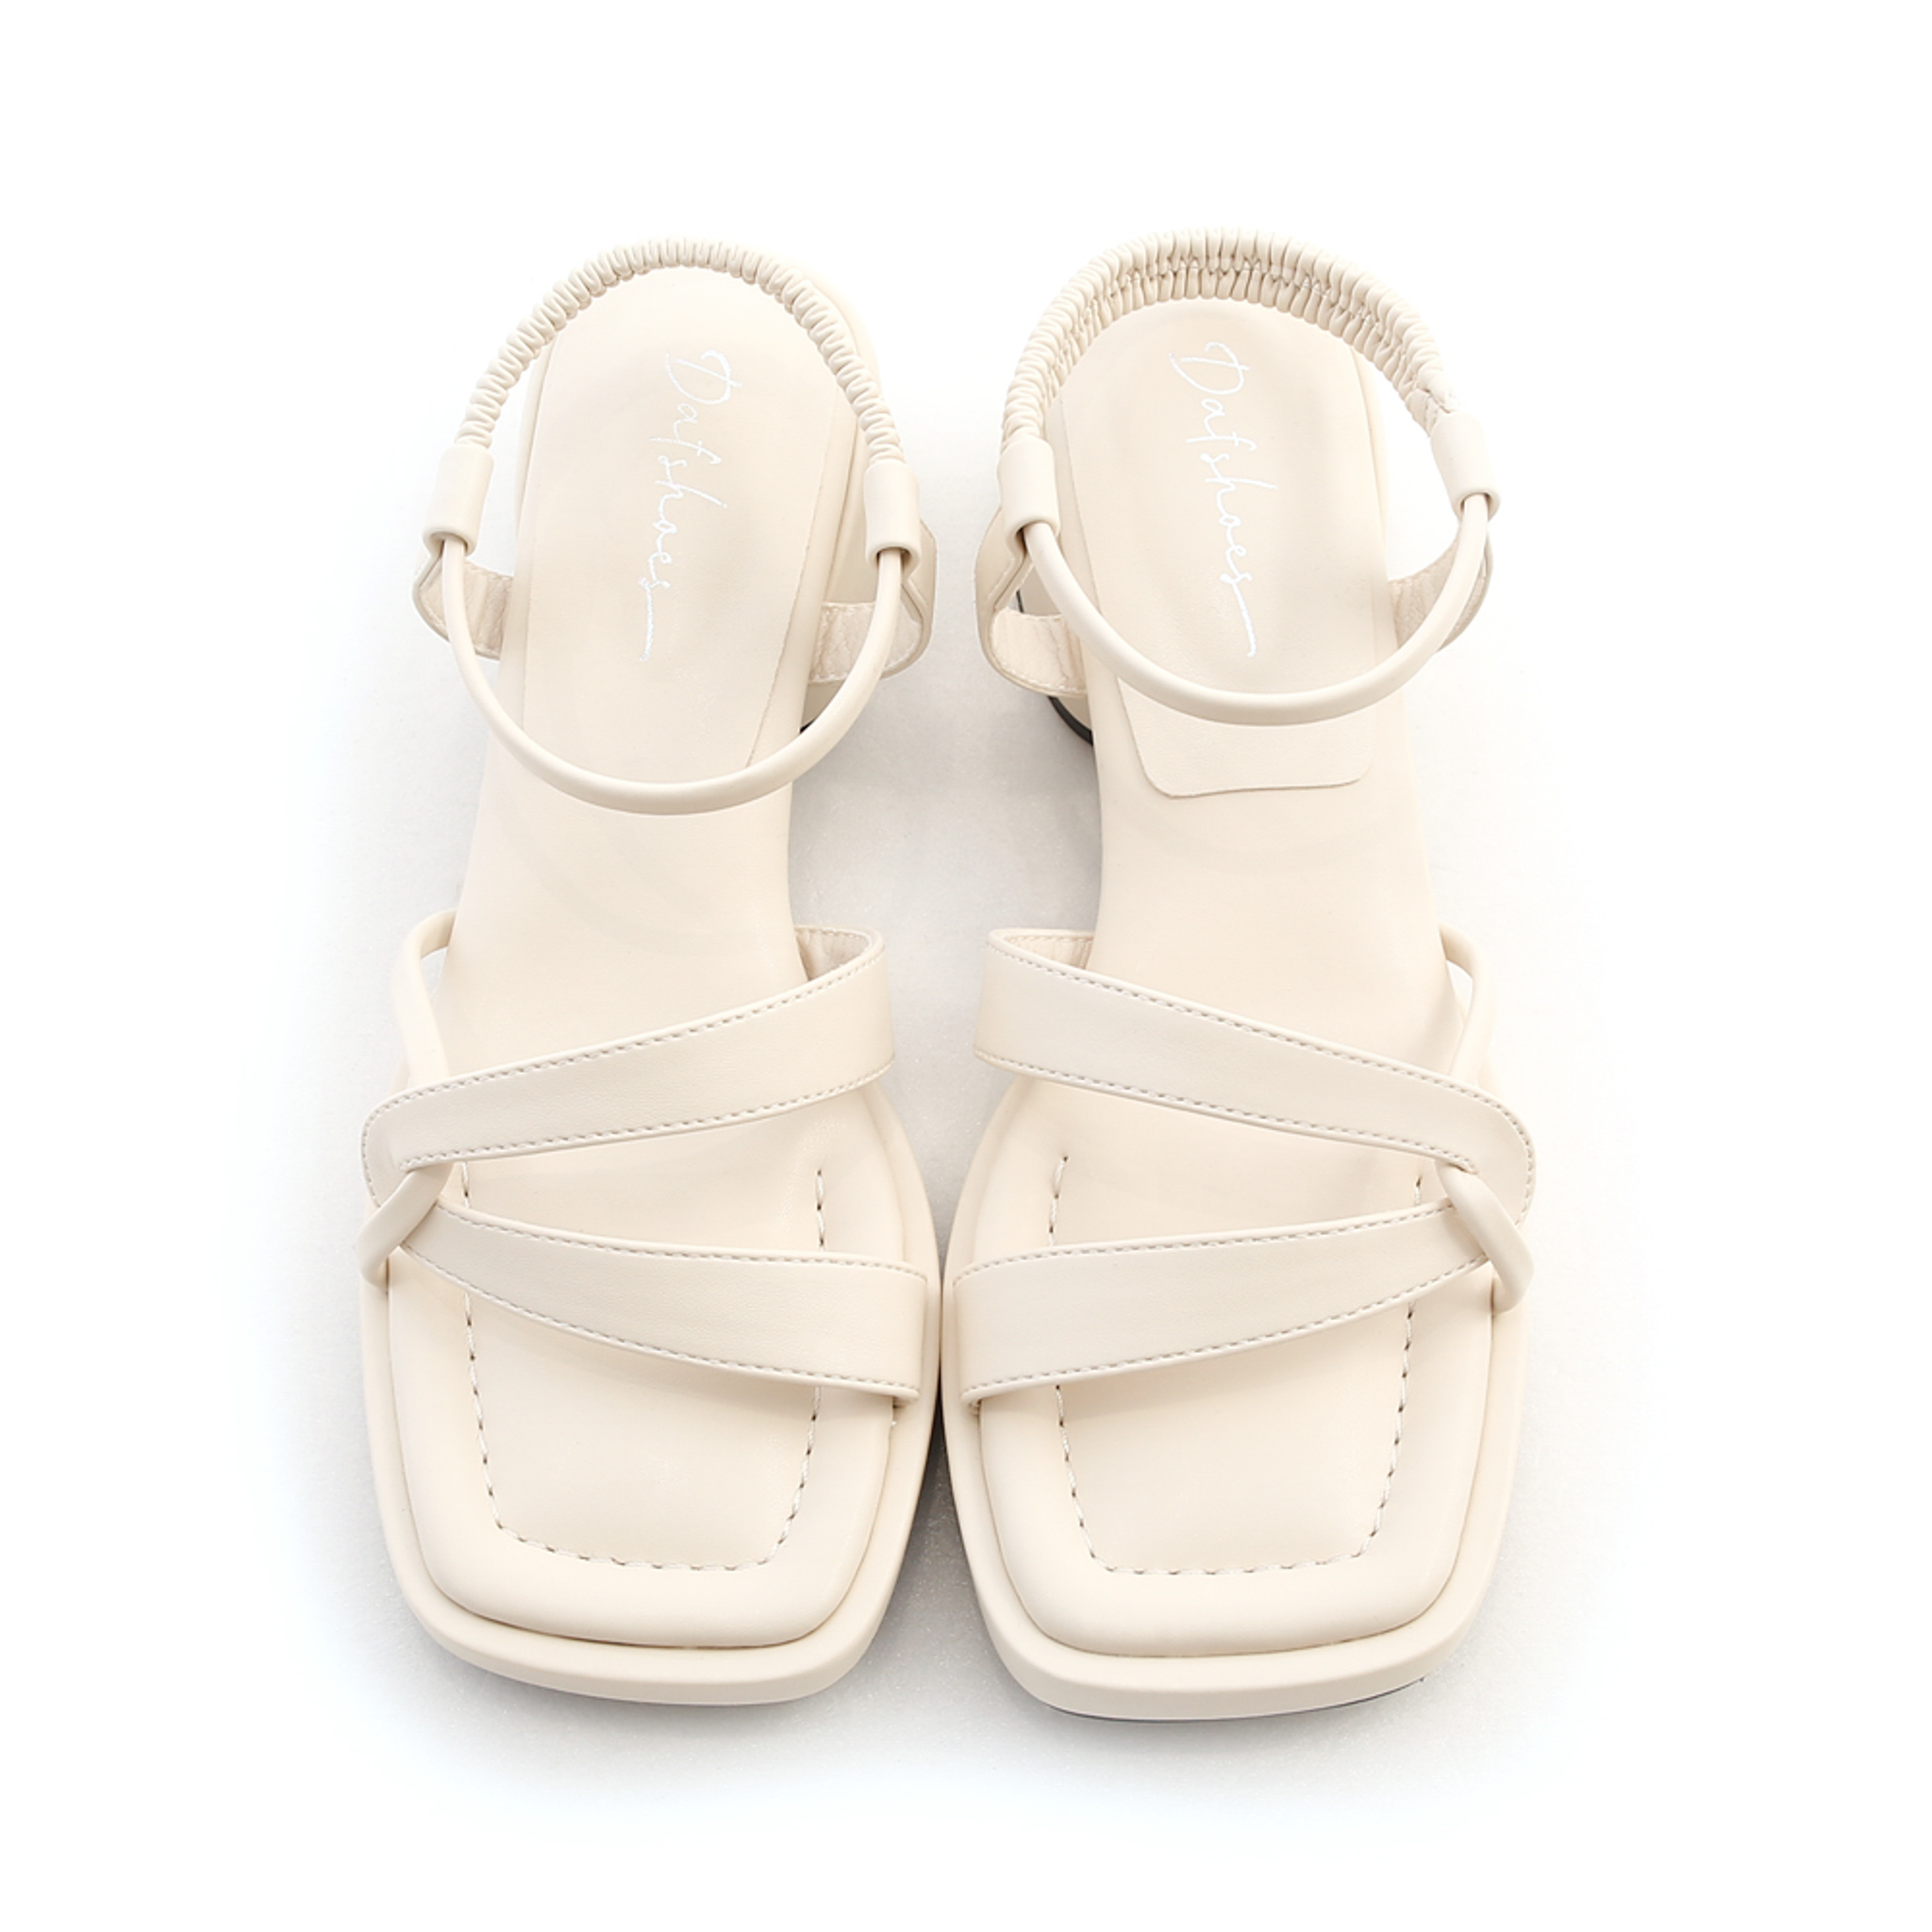 Puffy Cushioned Knot Mid Heel Sandals French Vanilla White